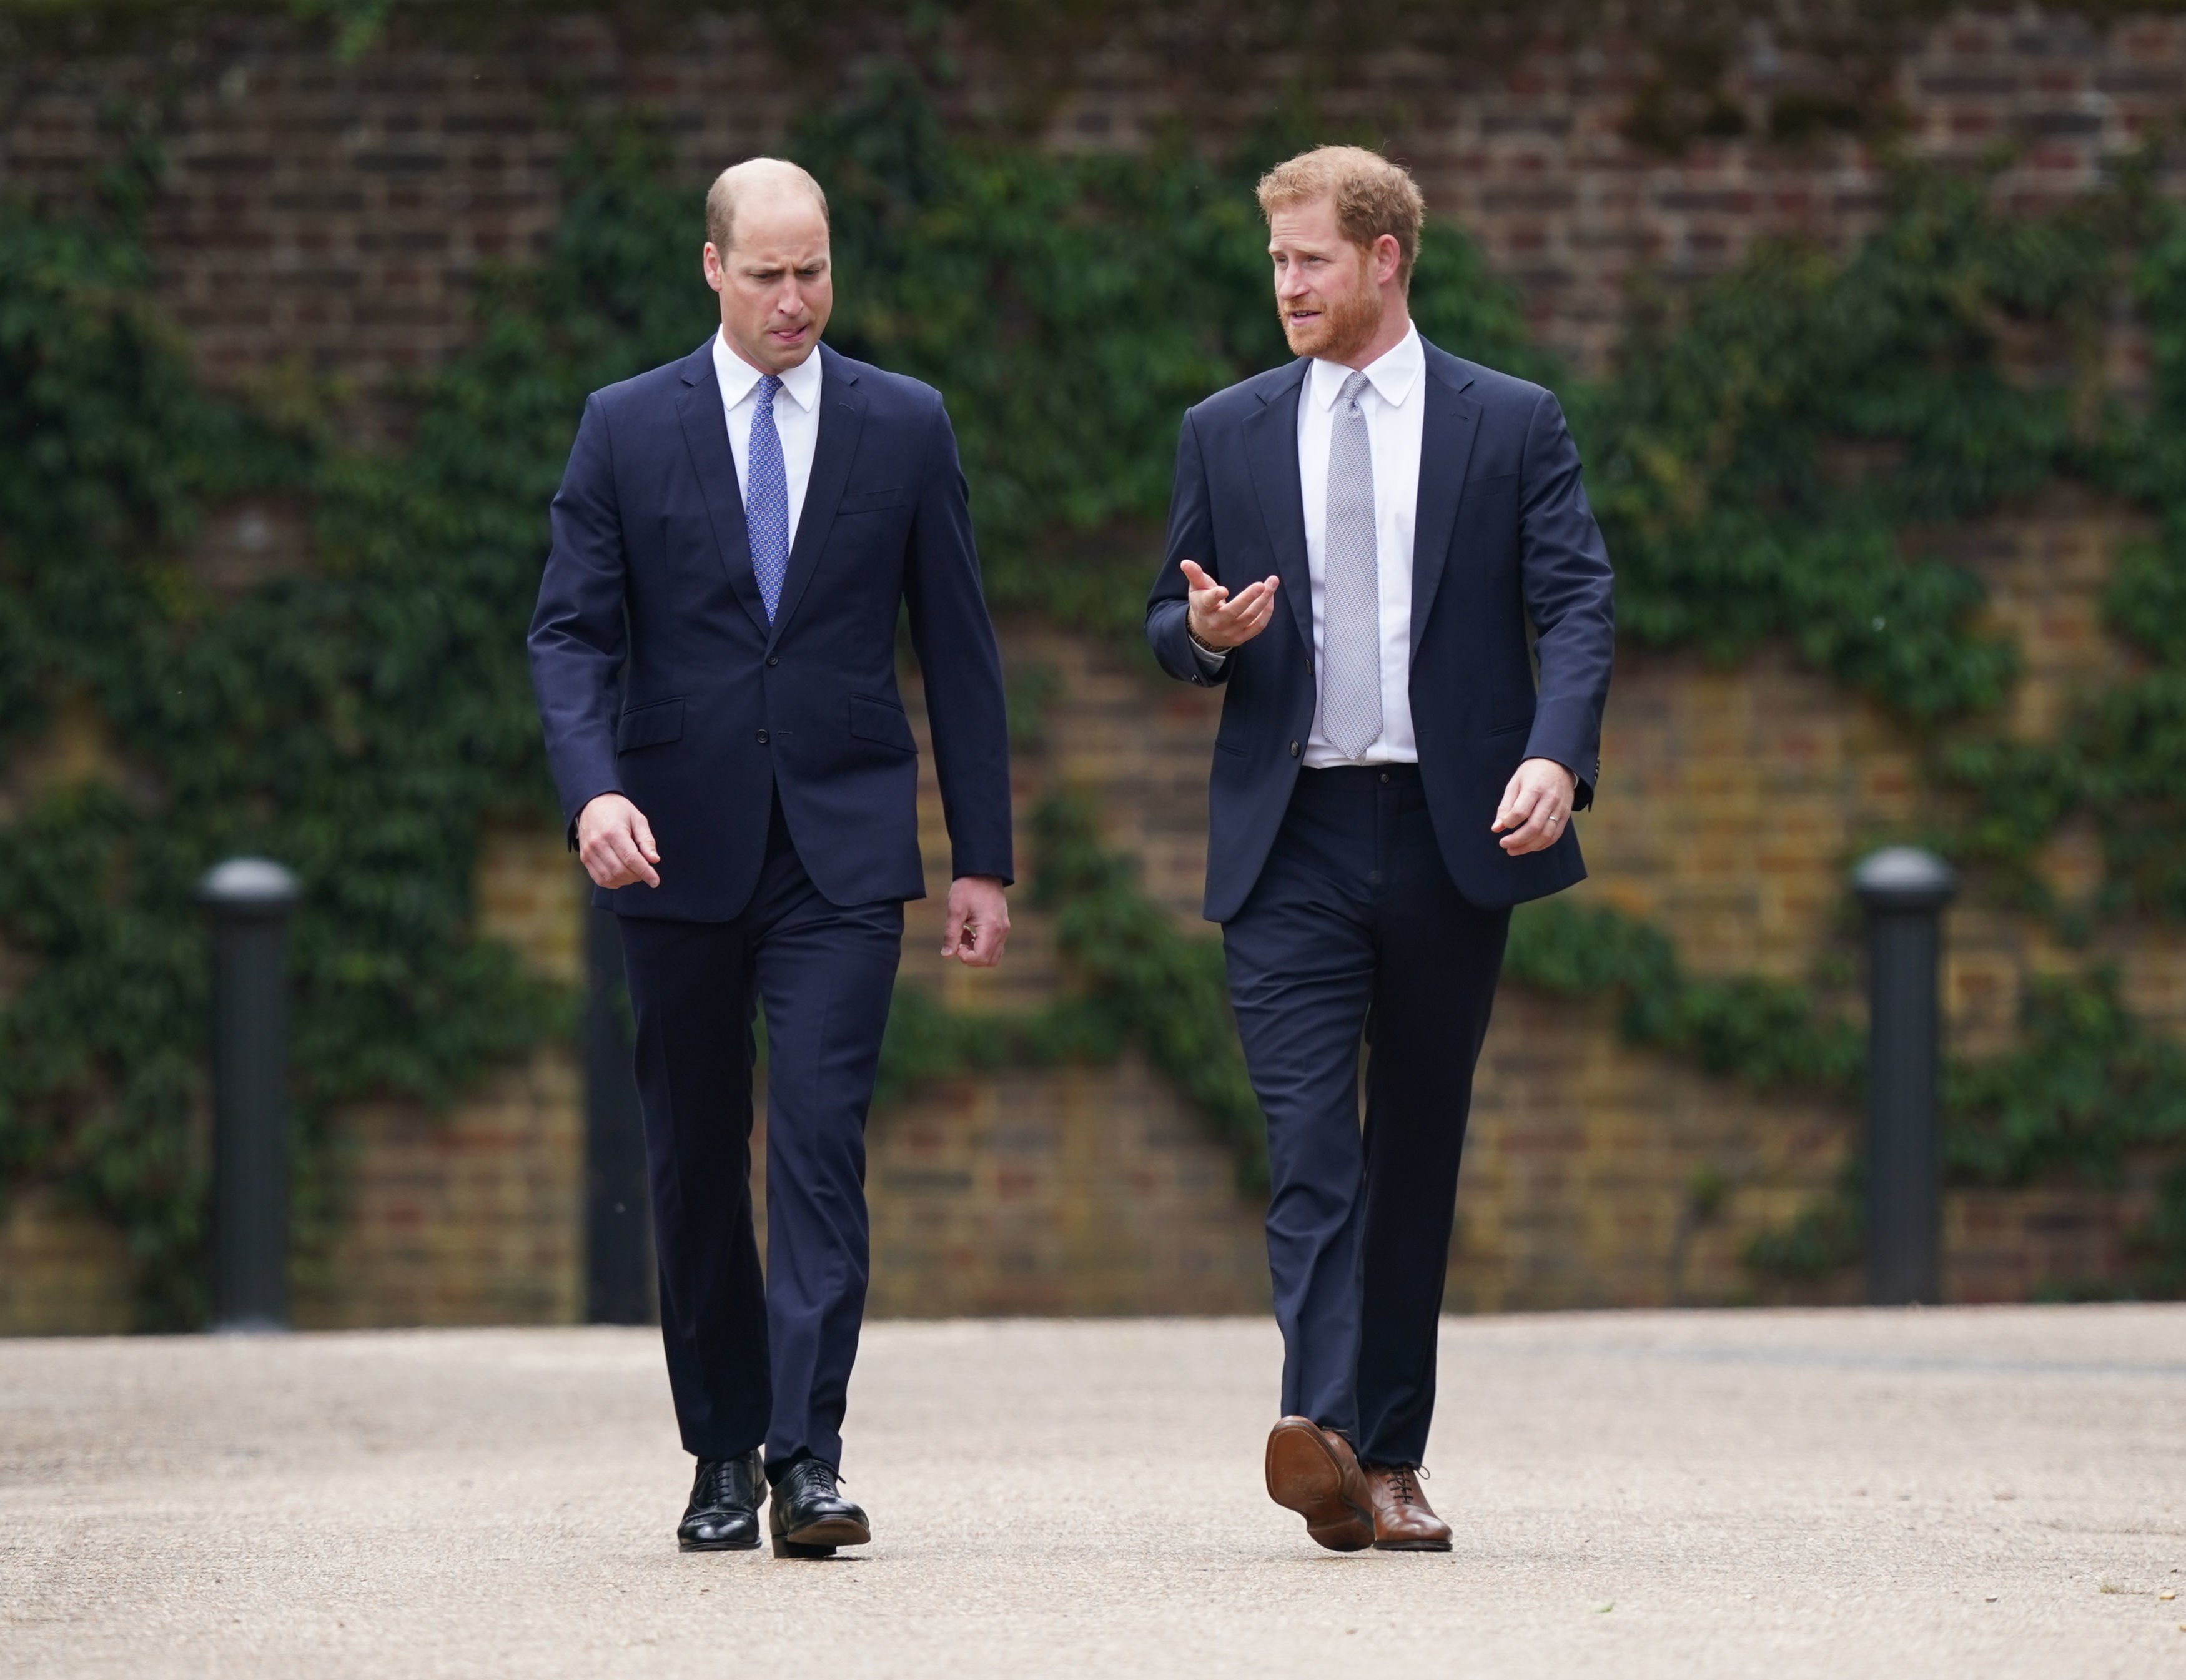 Prince William and Prince Harry at the unveiling of a statue they commissioned of their mother Princess Diana at Kensington Palace, on July 1, 2021, in London, England. | Source: Yui Mok - WPA Pool/Getty Images